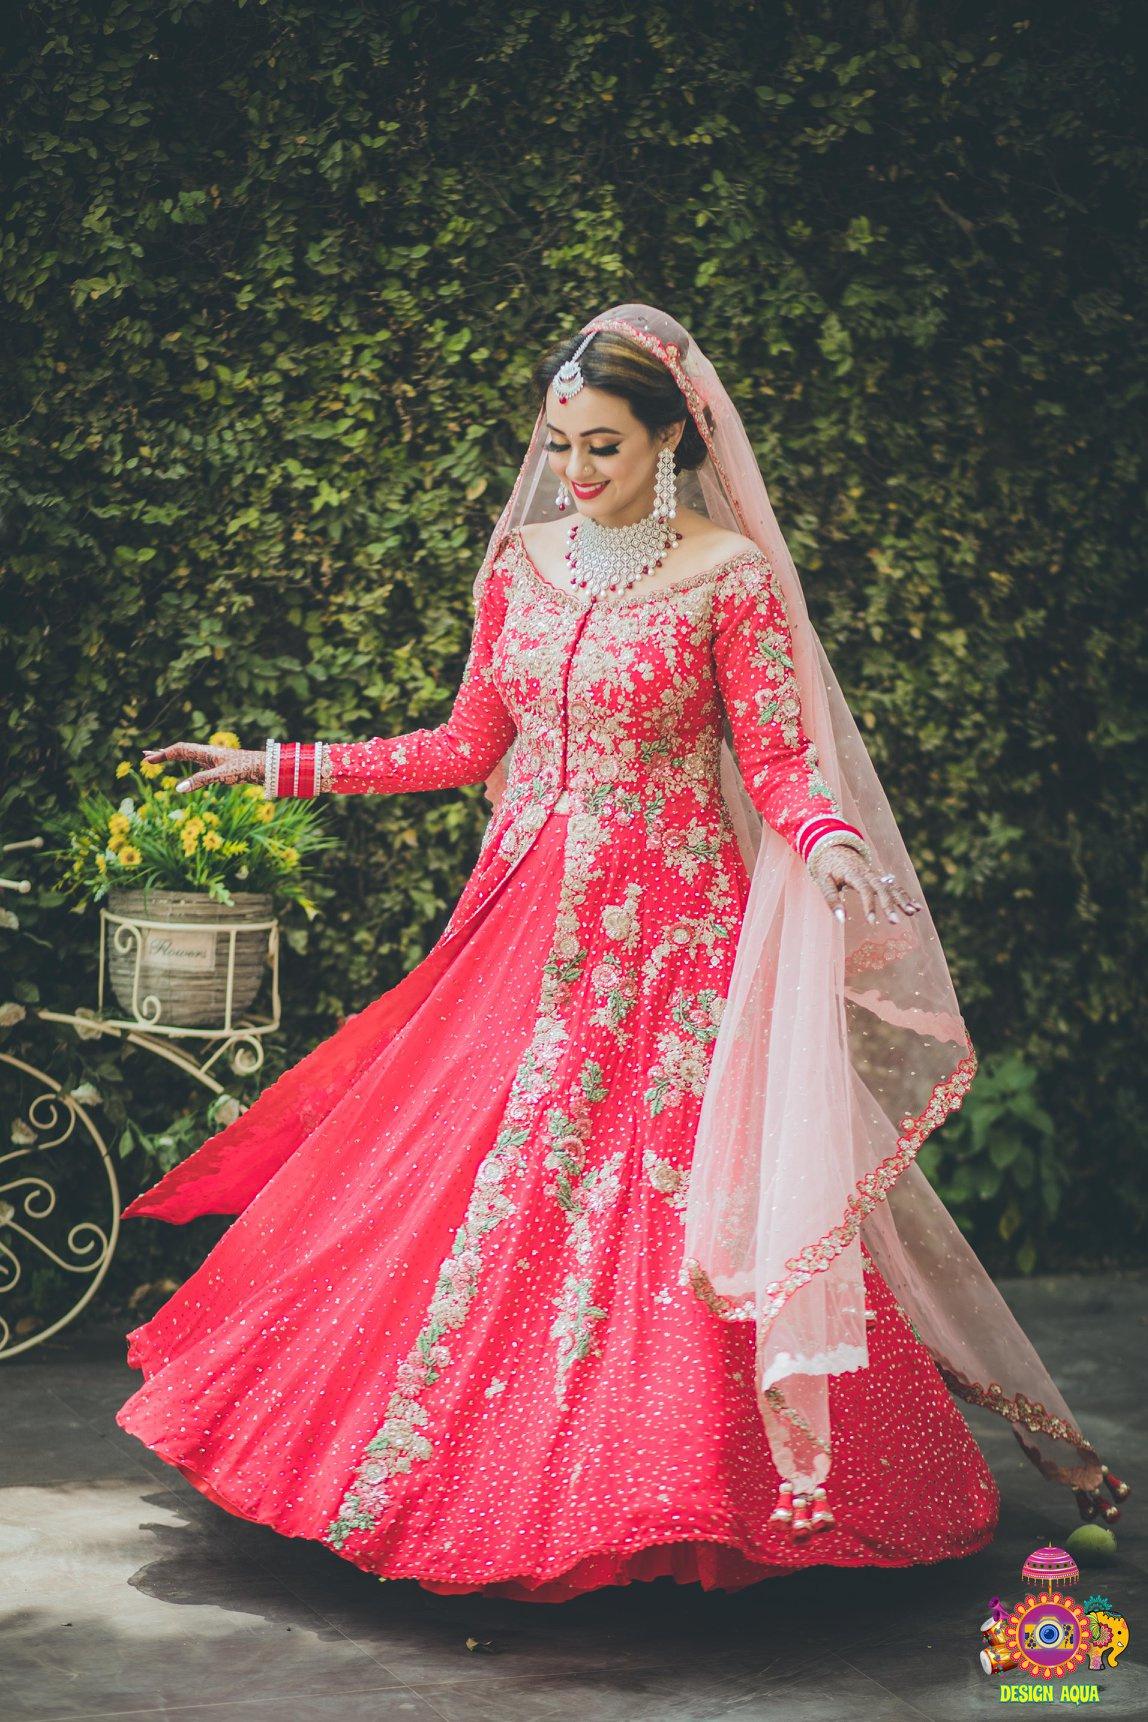 10 Red Coral Outfit Options for a Refreshing Trousseau Collection